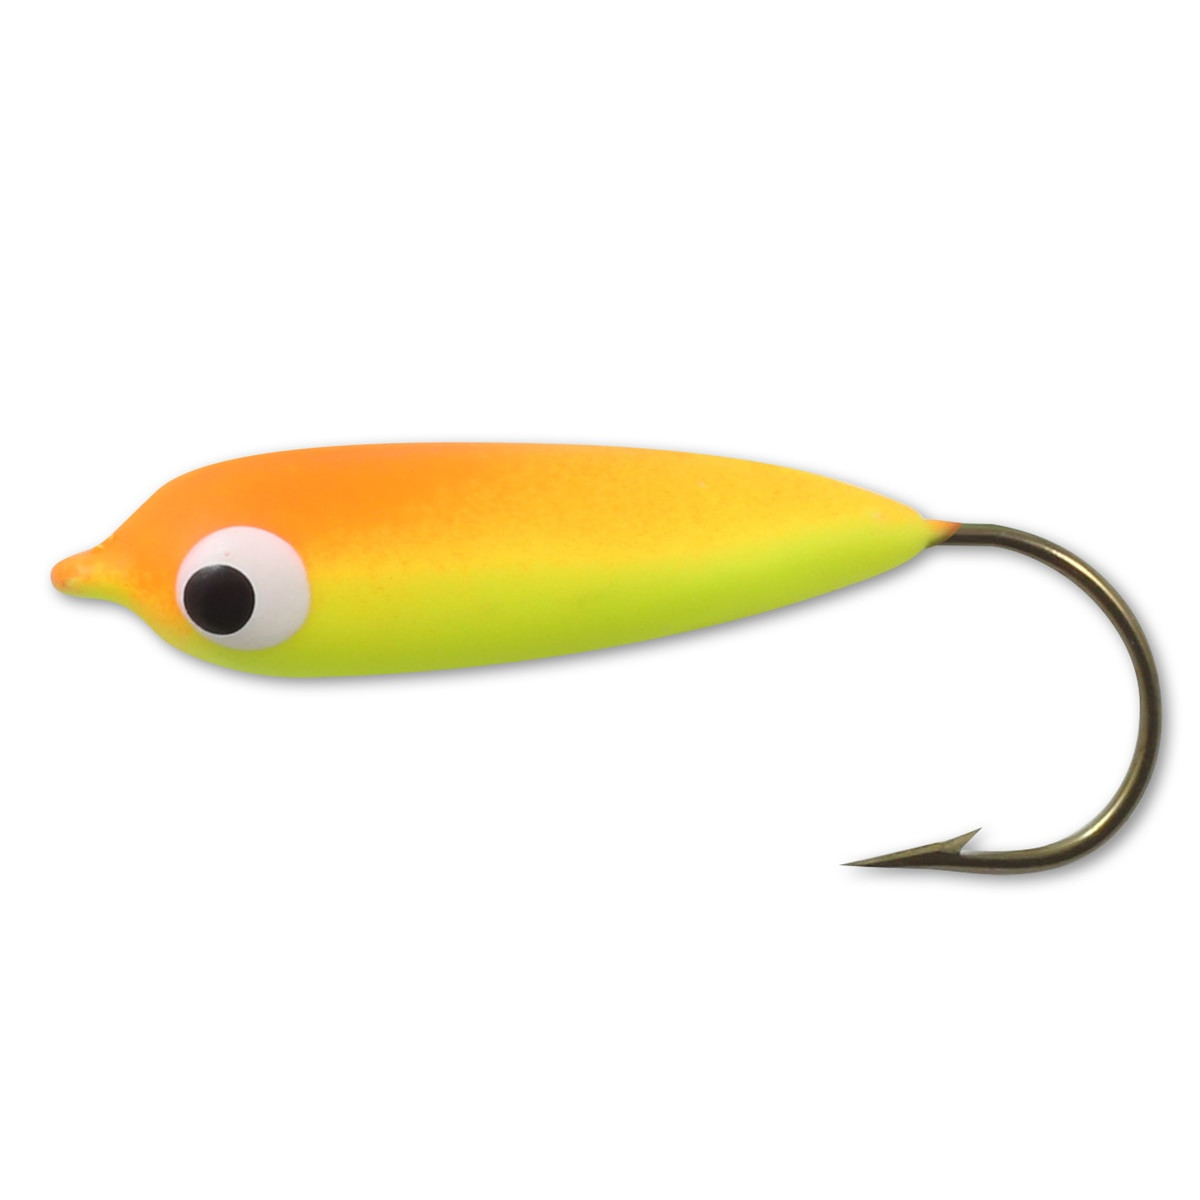 Northland Fishing Tackle Gum-Drop Floater Jig , Up to 22% Off